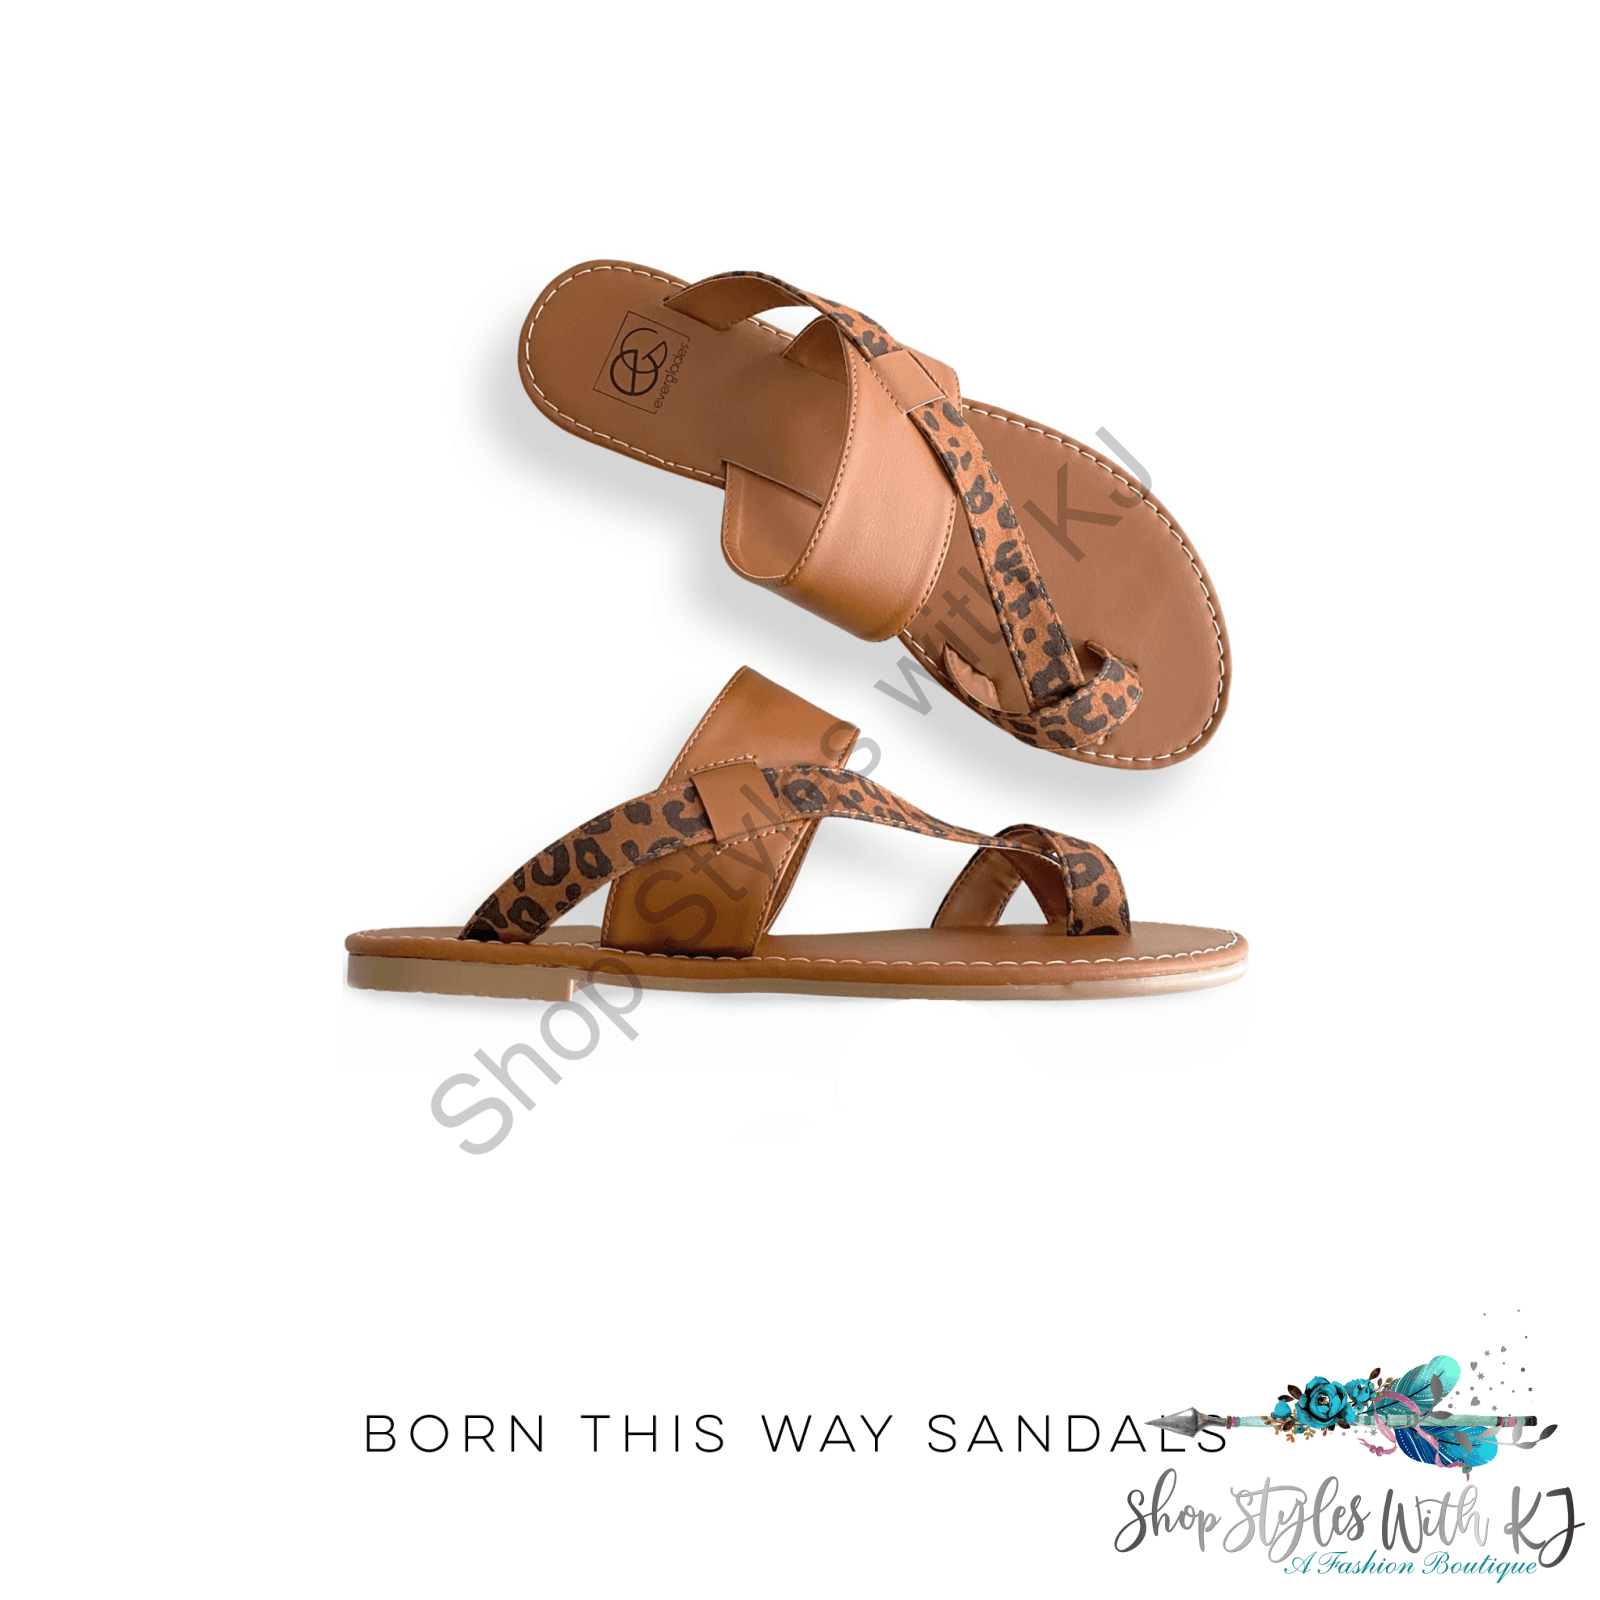 Born This Way Sandals Miami Shoes